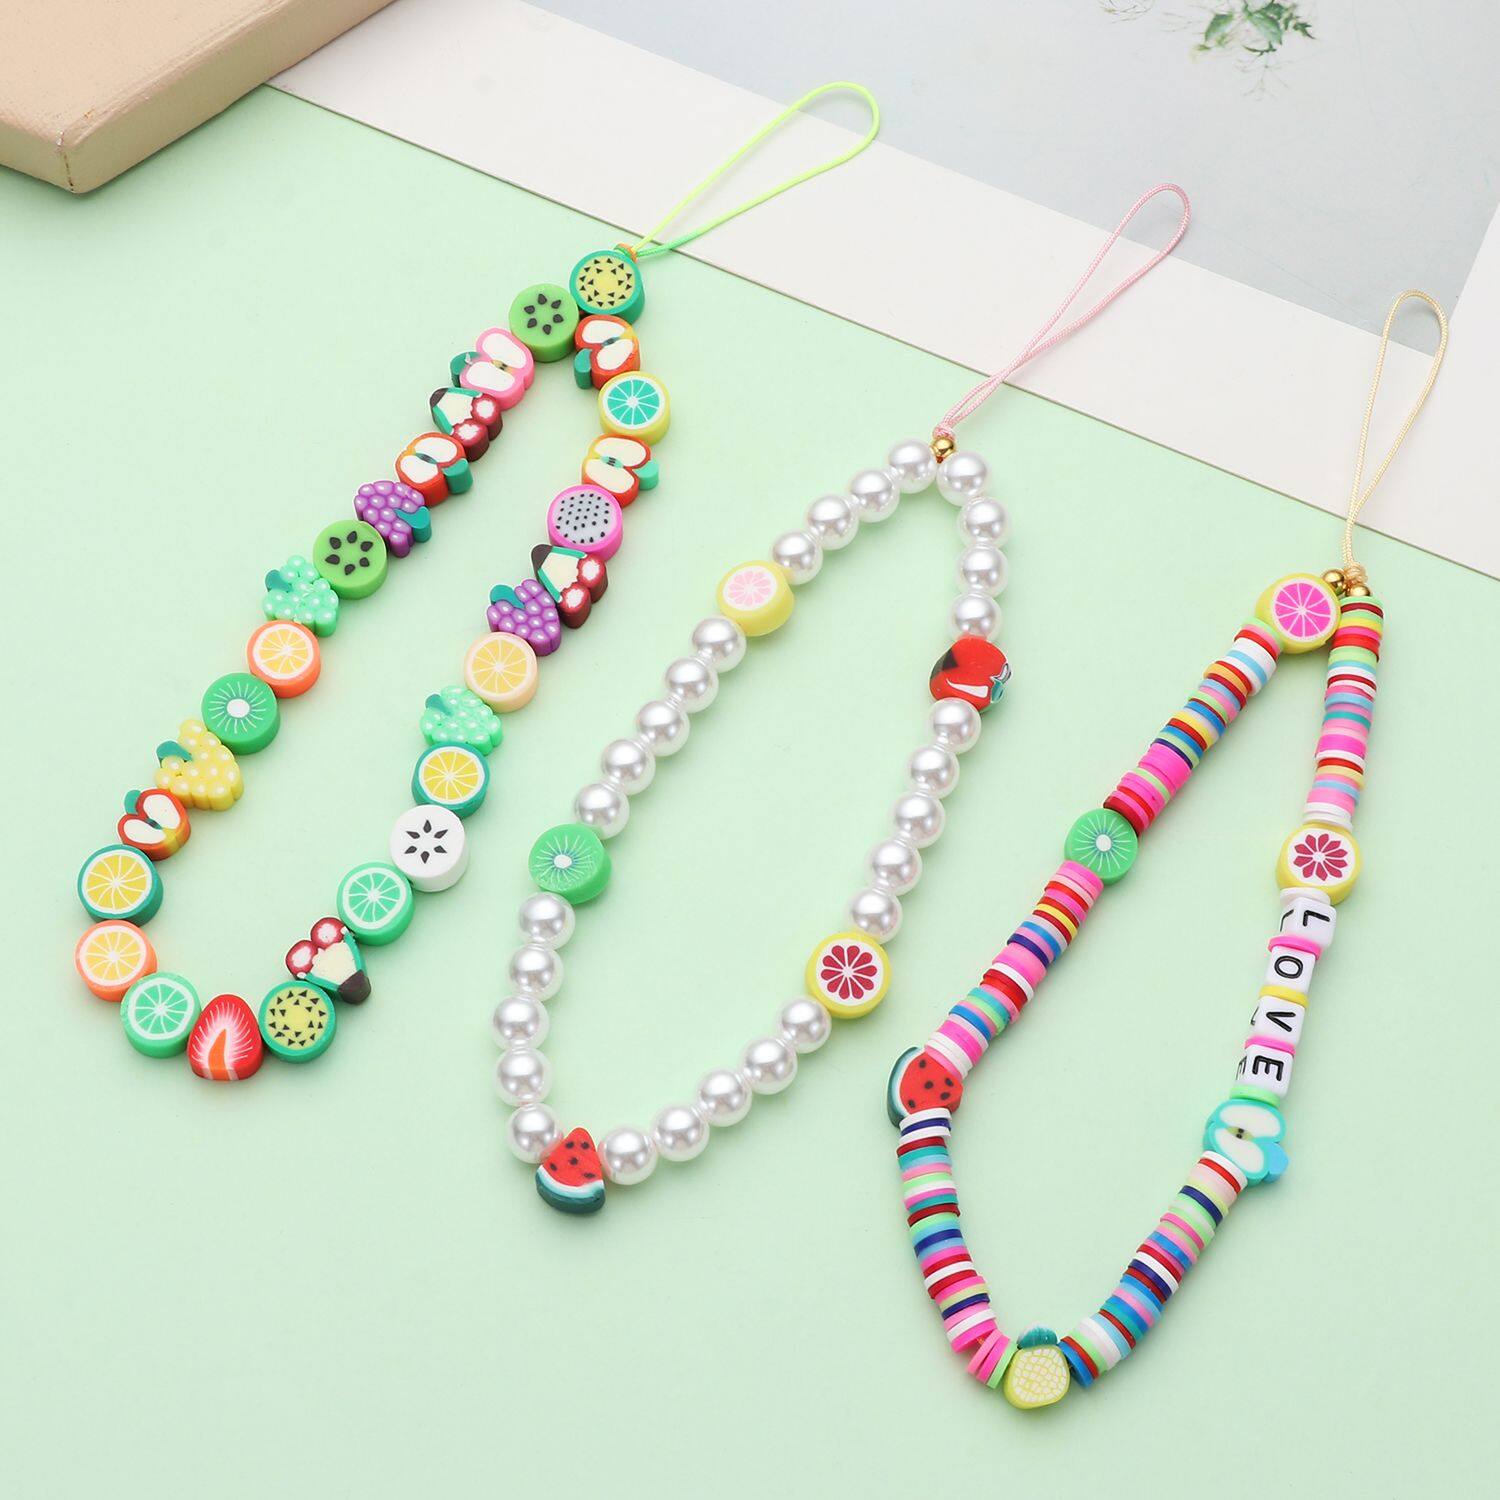 PU10703703603 Fashion Wrist Strap Acrylic Bead Keychain Phone Strap Lanyard Cell Phone Case Hanging Cord Fruit Letter Pearl Beaded Polymer Clay